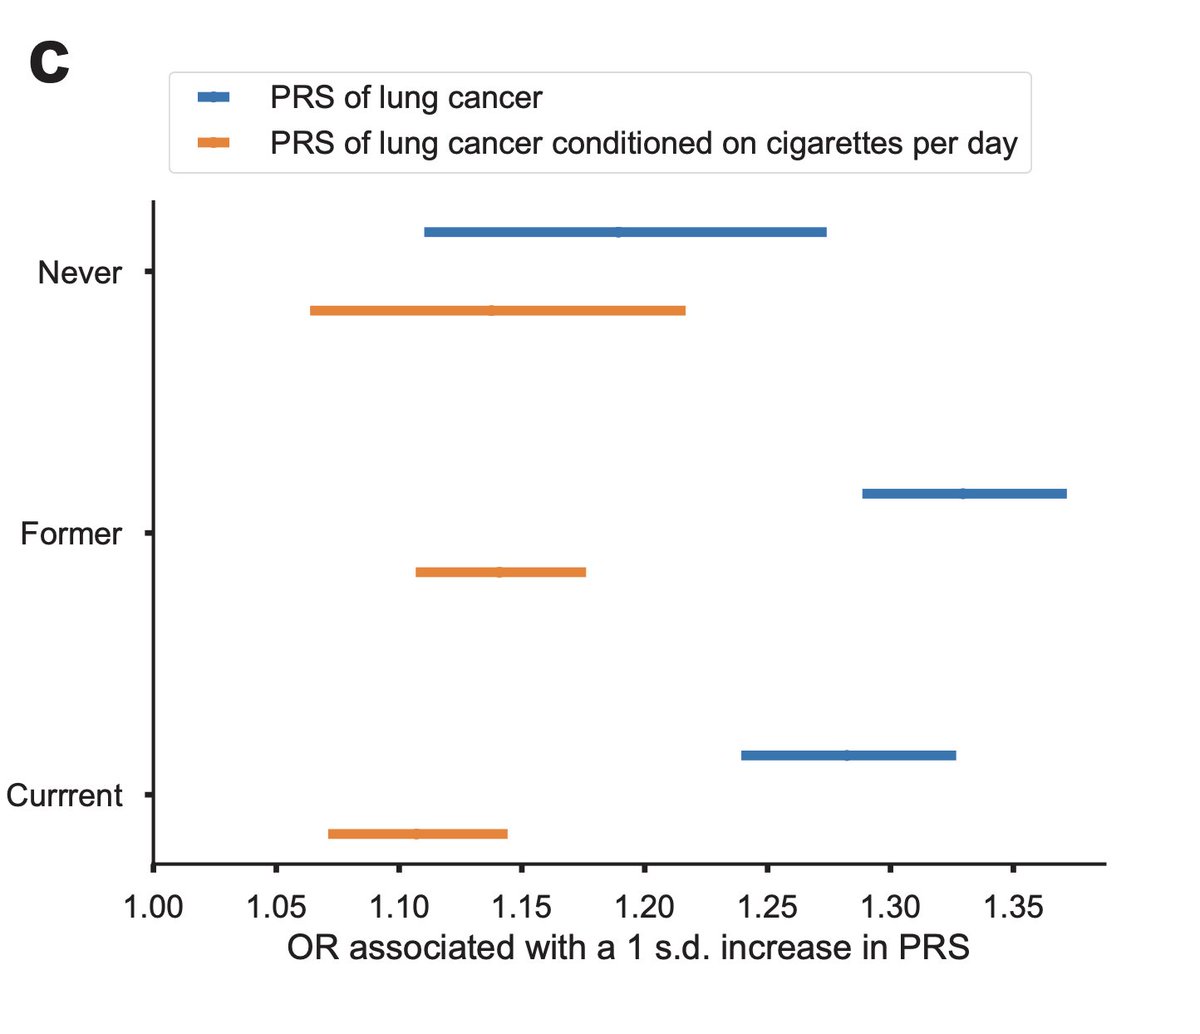 Love this plot showing the association of polygenic score of lung cancer with lung cancer. Once you condition on smoking, the effect size becomes similar across current, former and never-smokers. Gormon et al. medRxiv medrxiv.org/content/10.110…